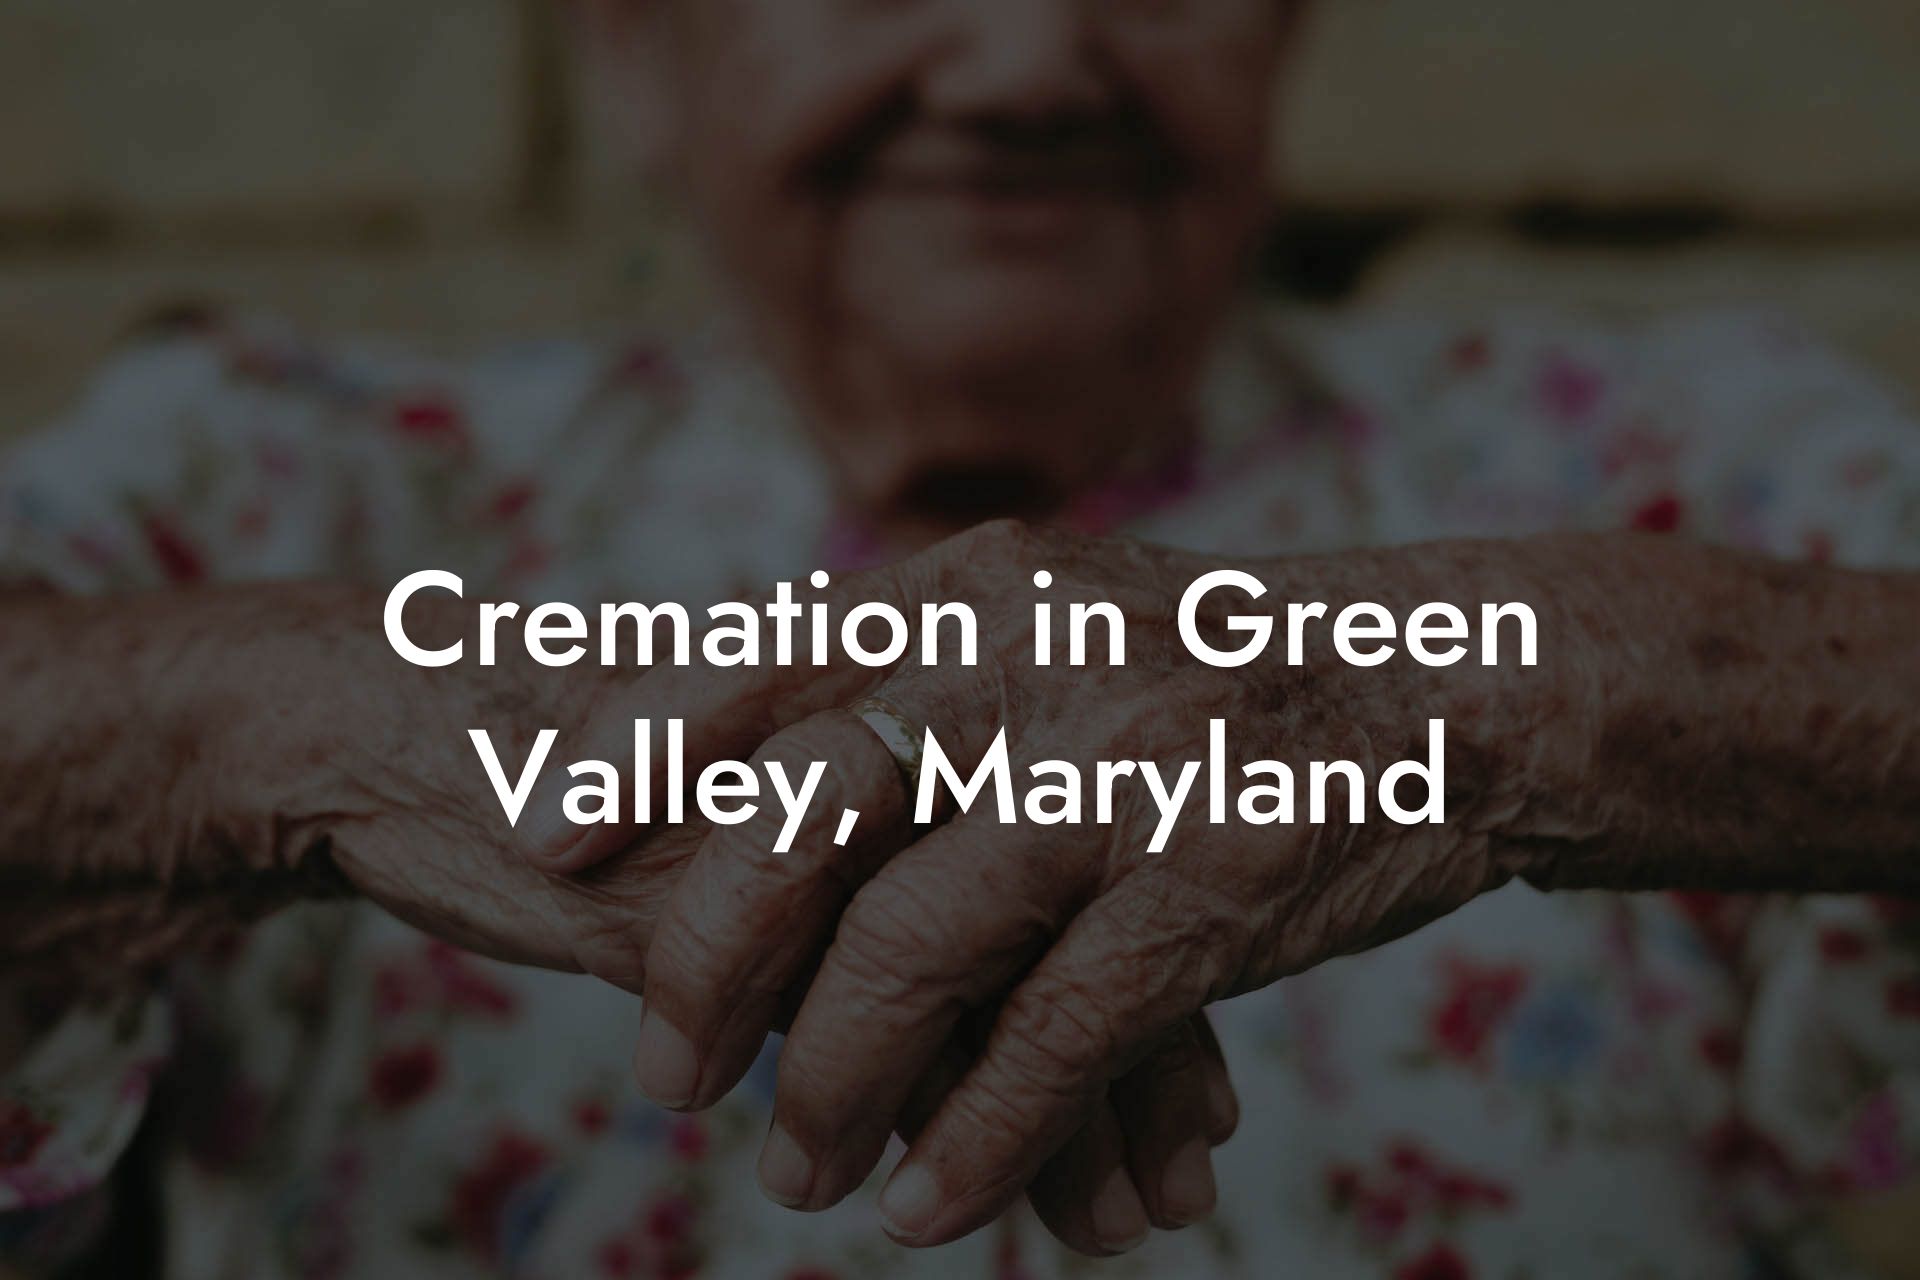 Cremation in Green Valley, Maryland